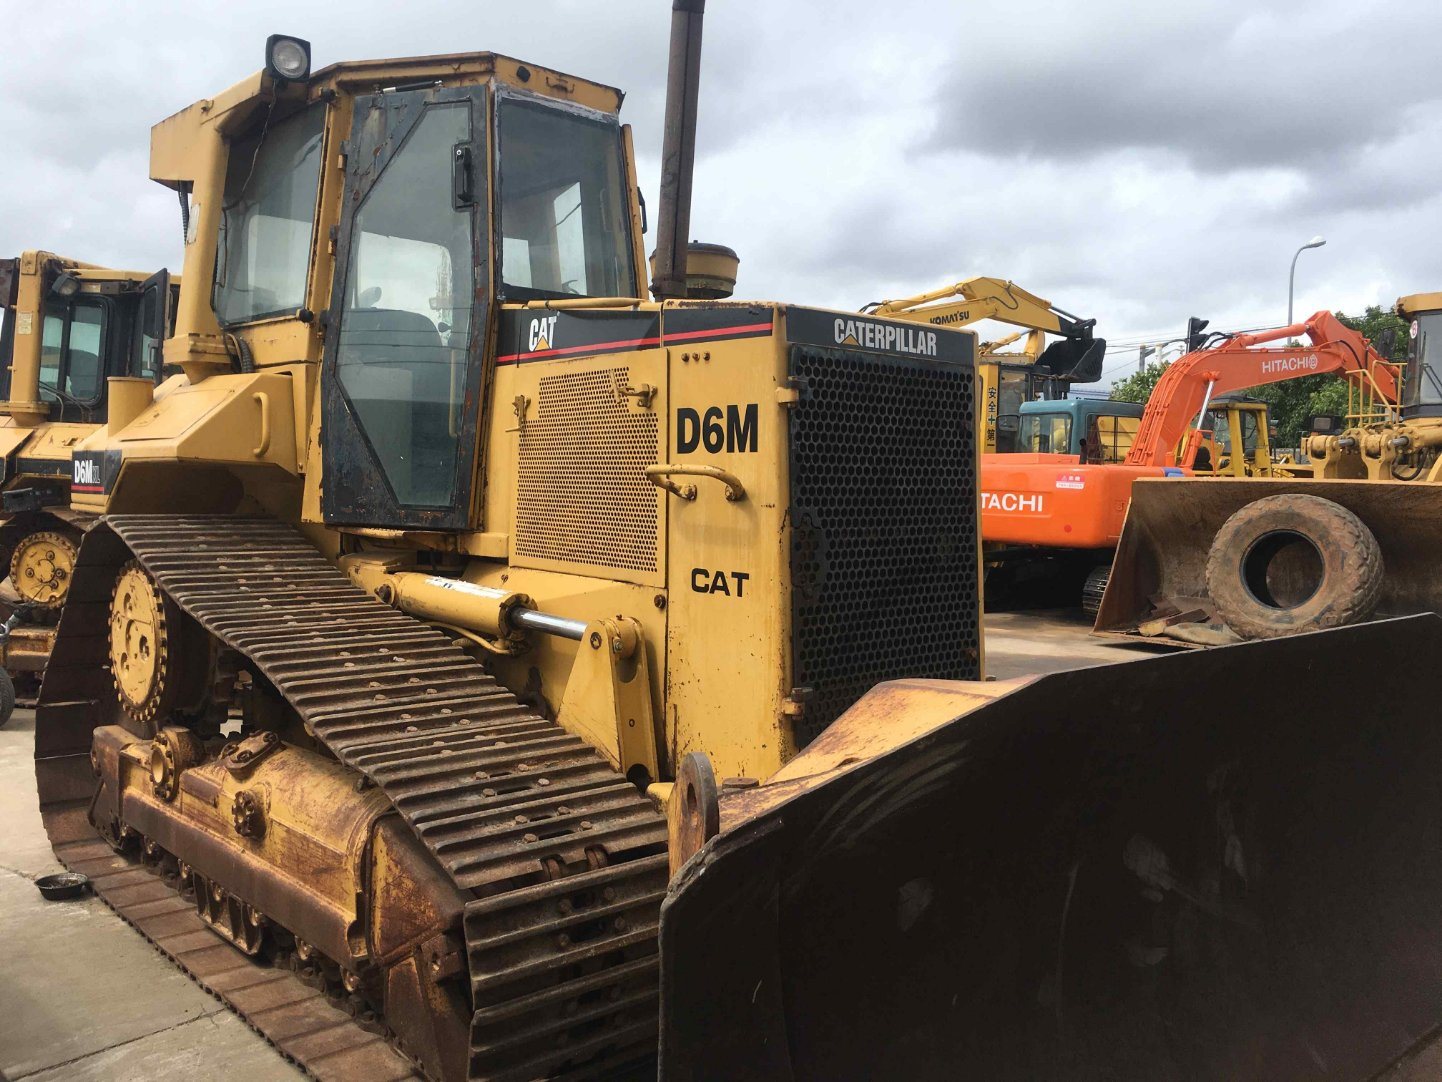 Used Cat D6m Dozer for Sale, Secondhand Caterpillar Blade Dozer Caterpillar D6m with Good Condition in Cheap Price